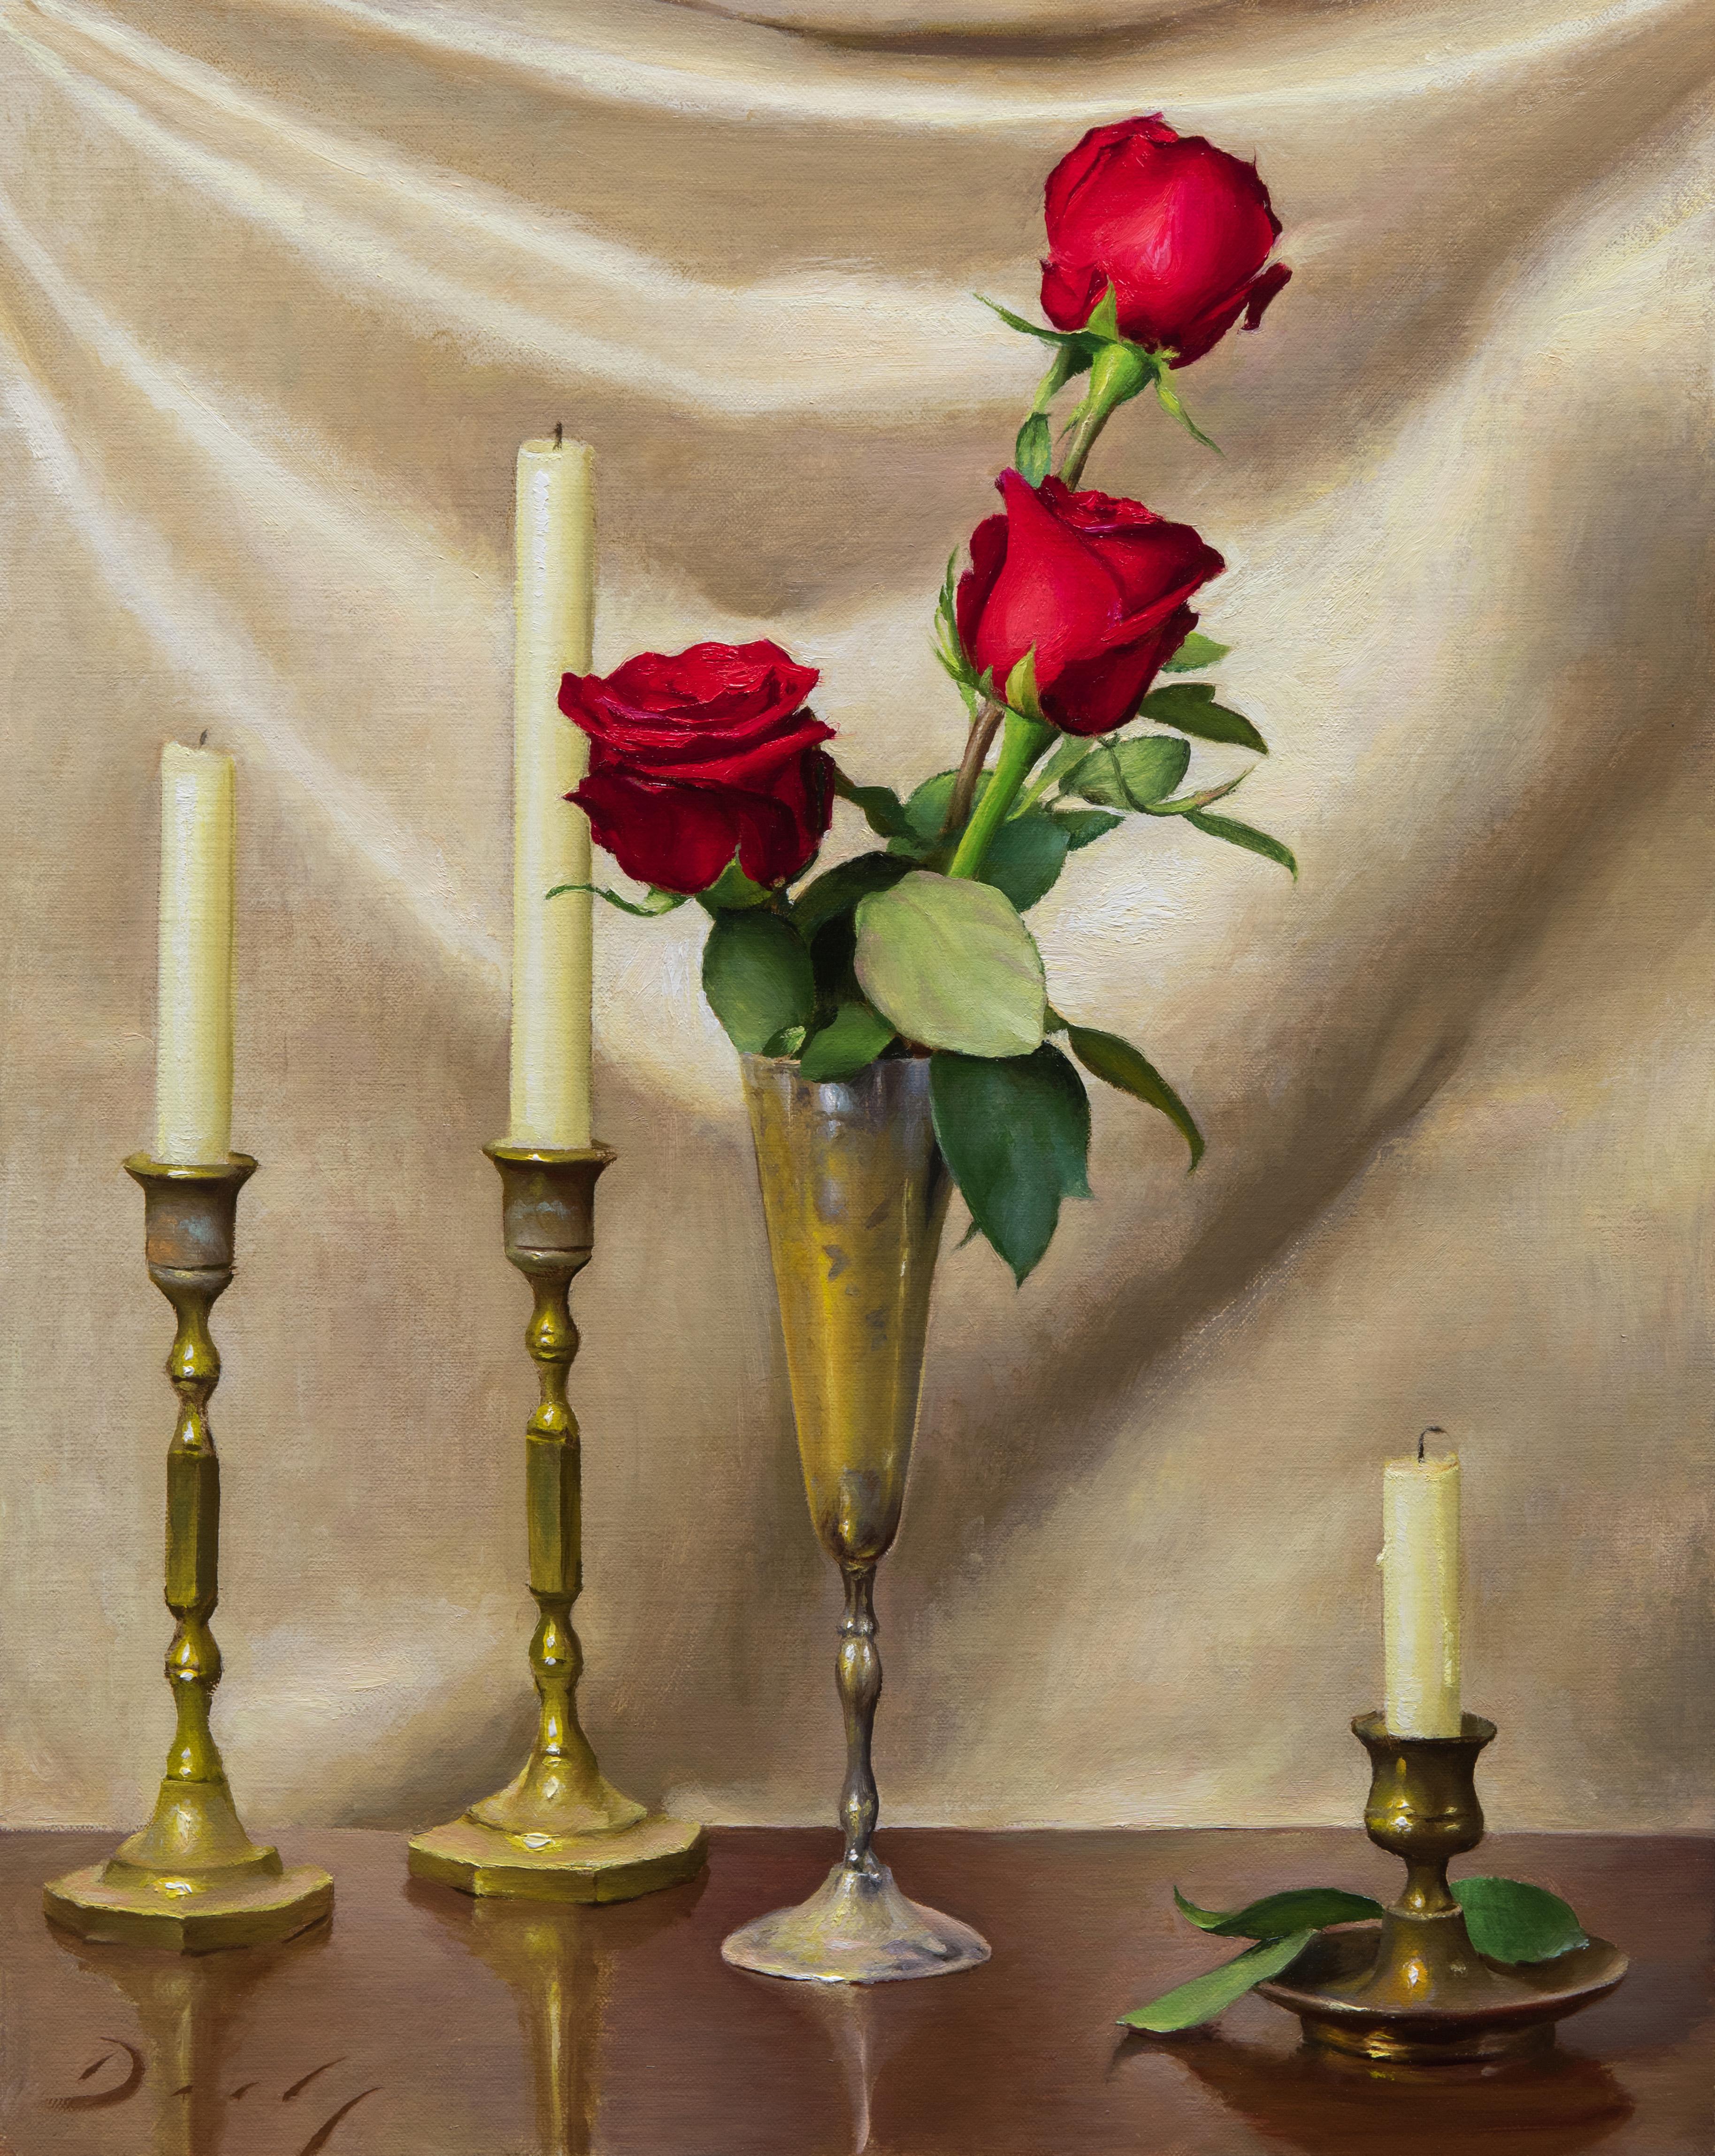 Arrangement in Red and Gold features three red roses in a delicate brass vase. Candlesticks flank both sides of the vase and their varying sizes provide interest to the otherwise simple composition. The light gold background does not detract from